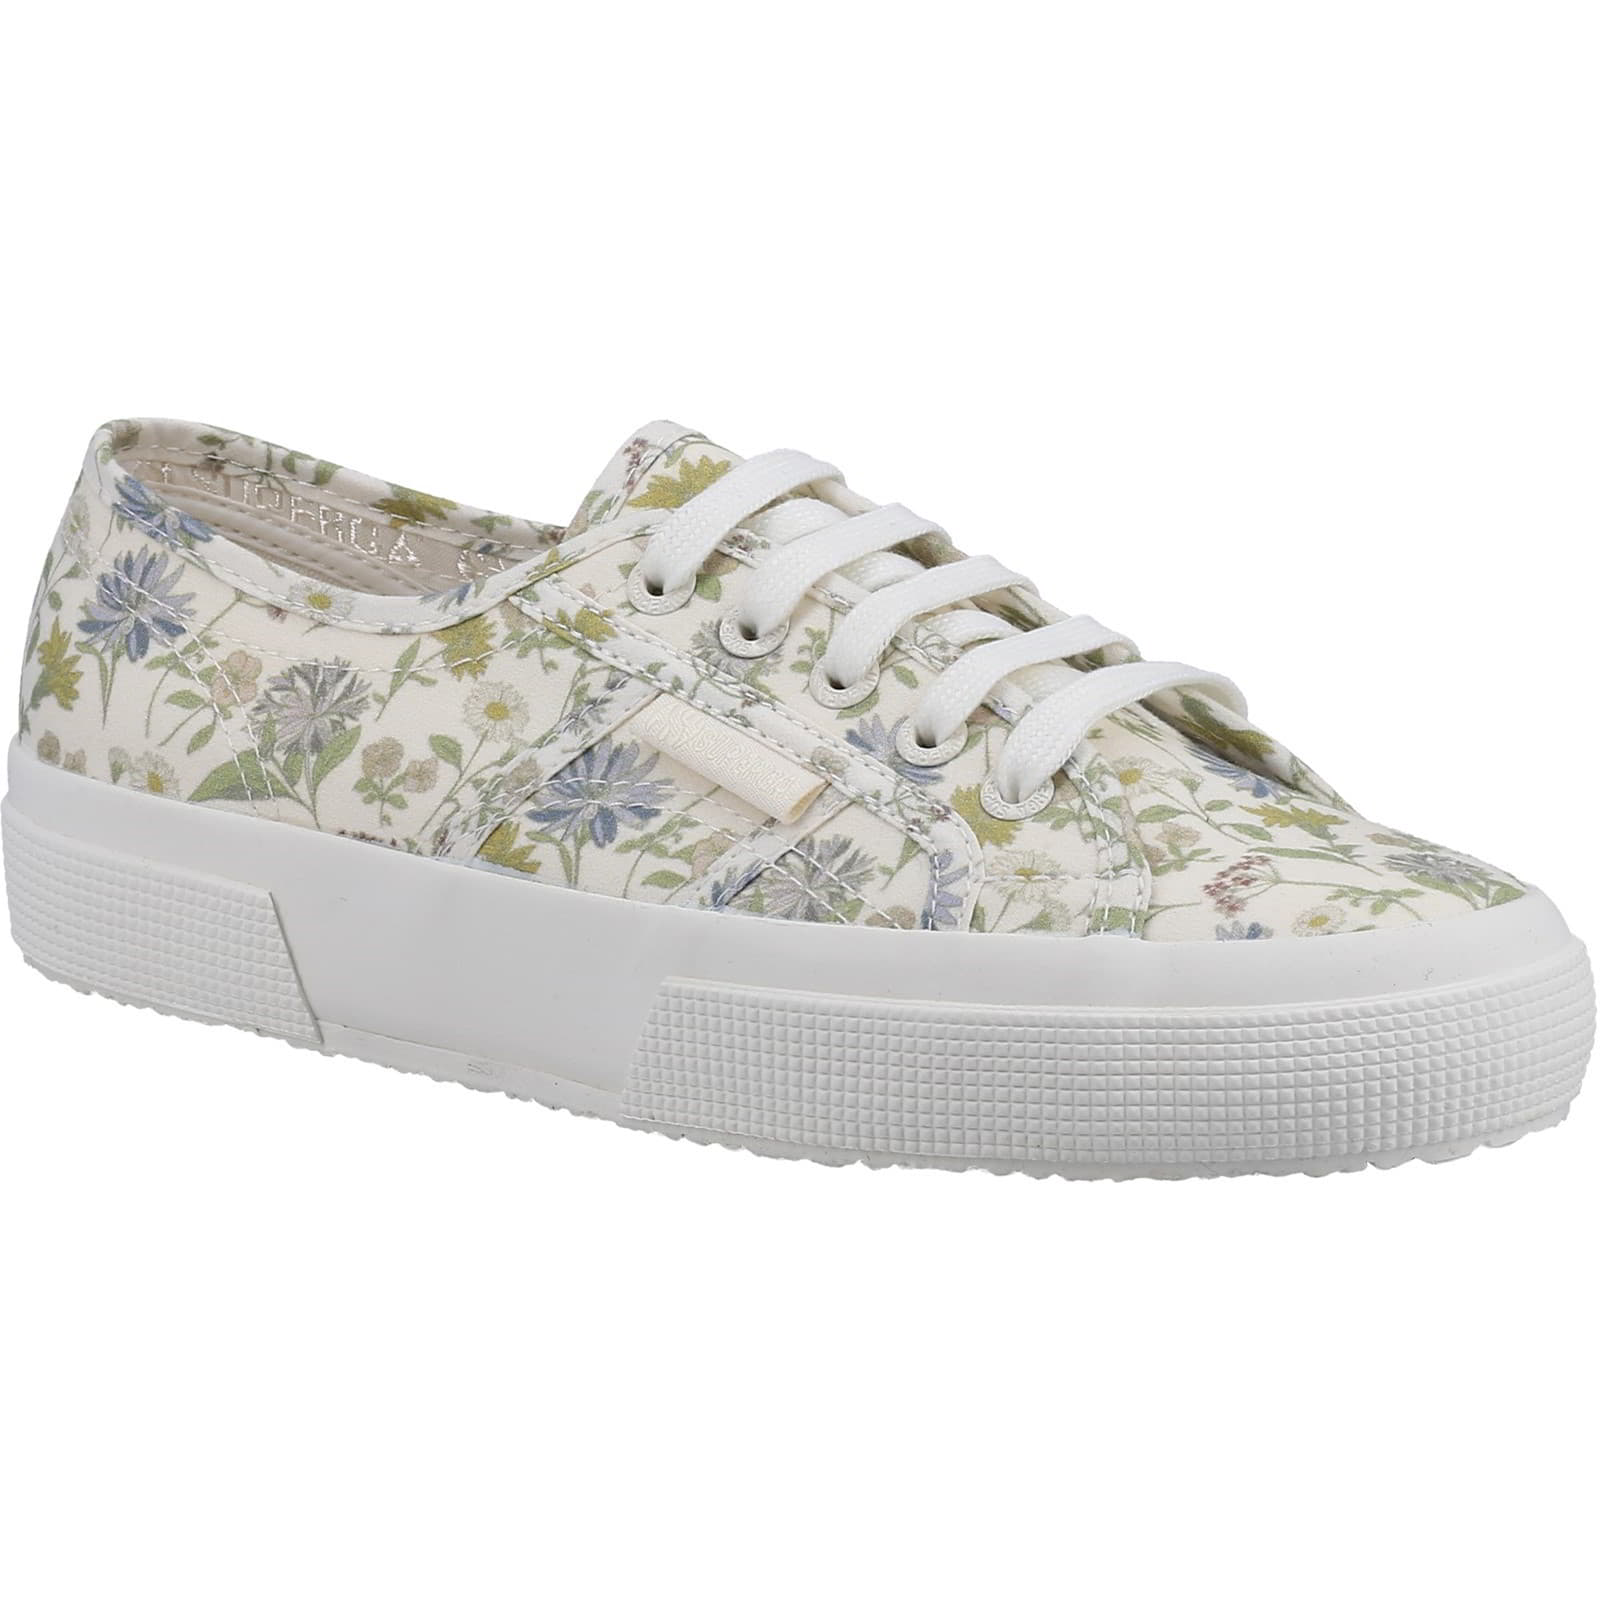 Superga Women's 2750 Floral Print Lace Up Trainers Shoes - UK 4